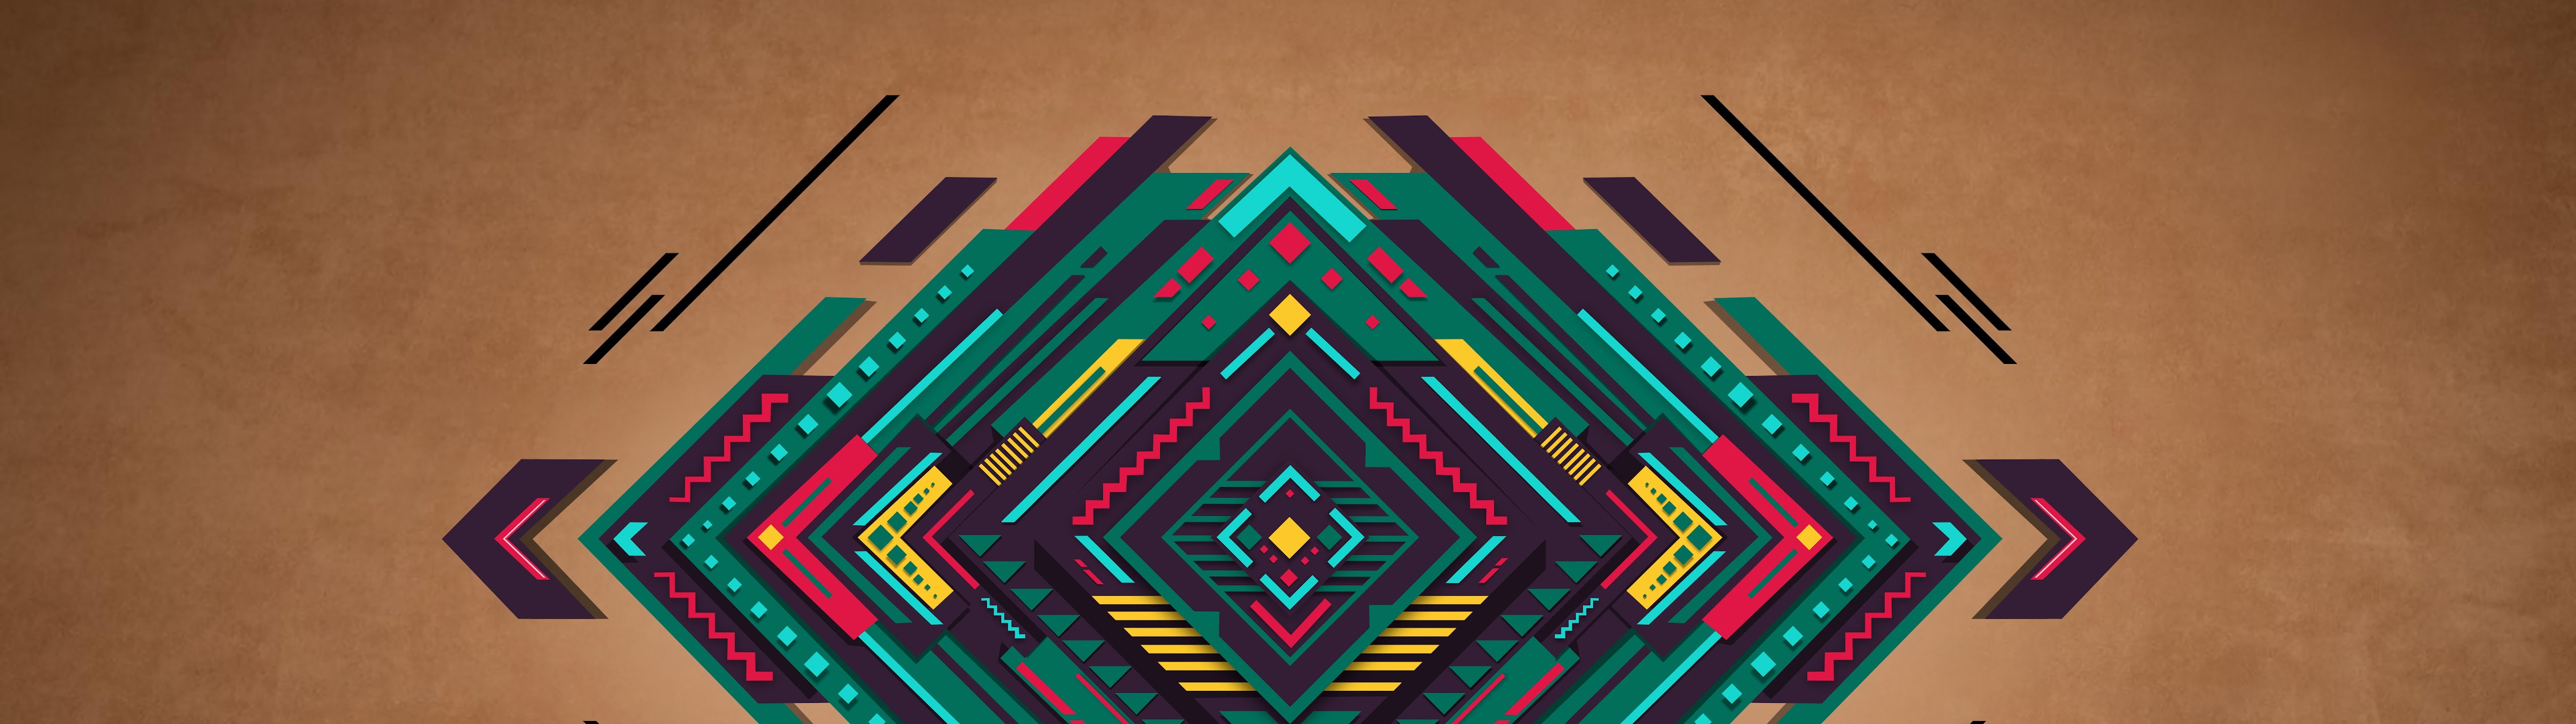 Cool Abstract Designs Wallpapers